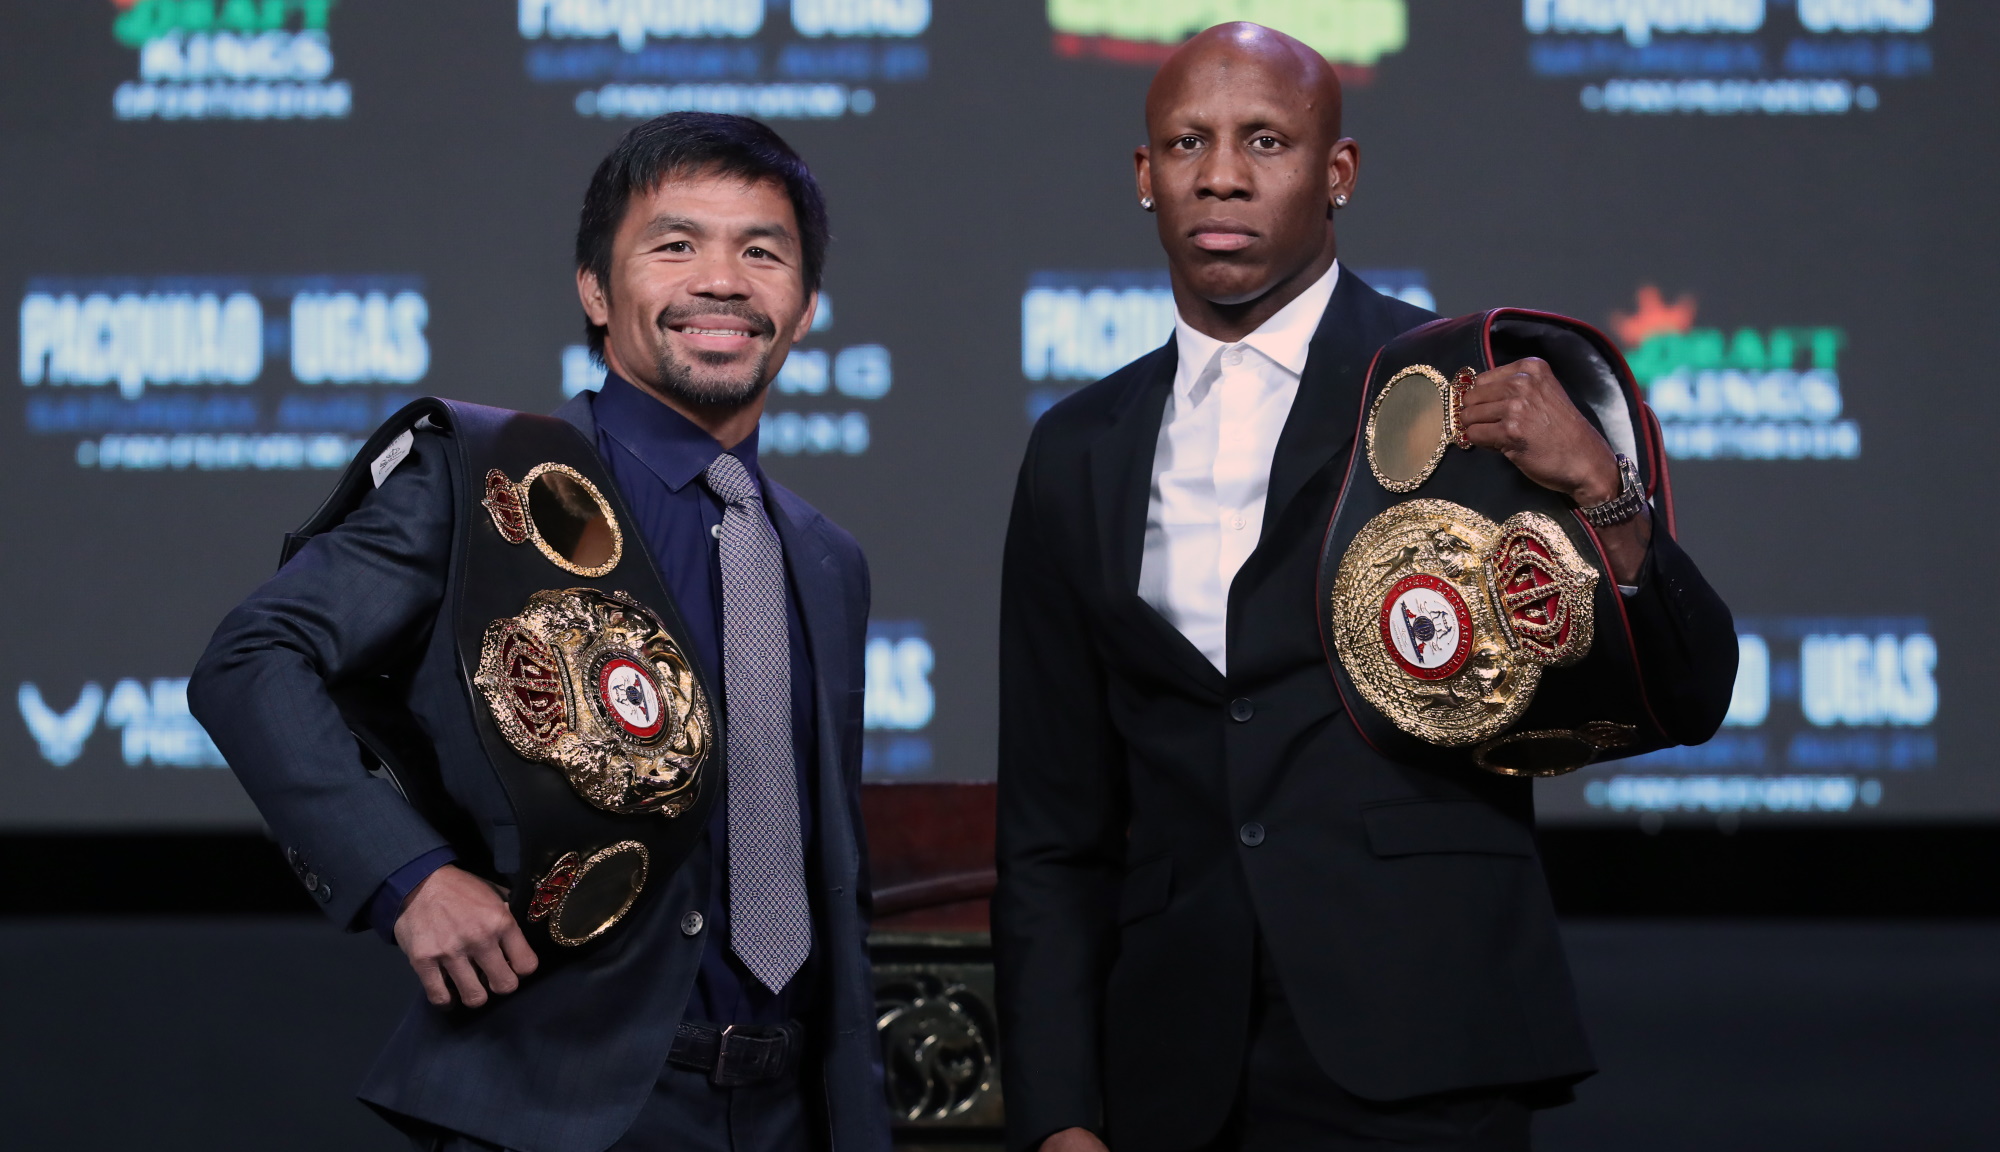 Manny Pacquiao and Yordenis Ugas posing before their fight